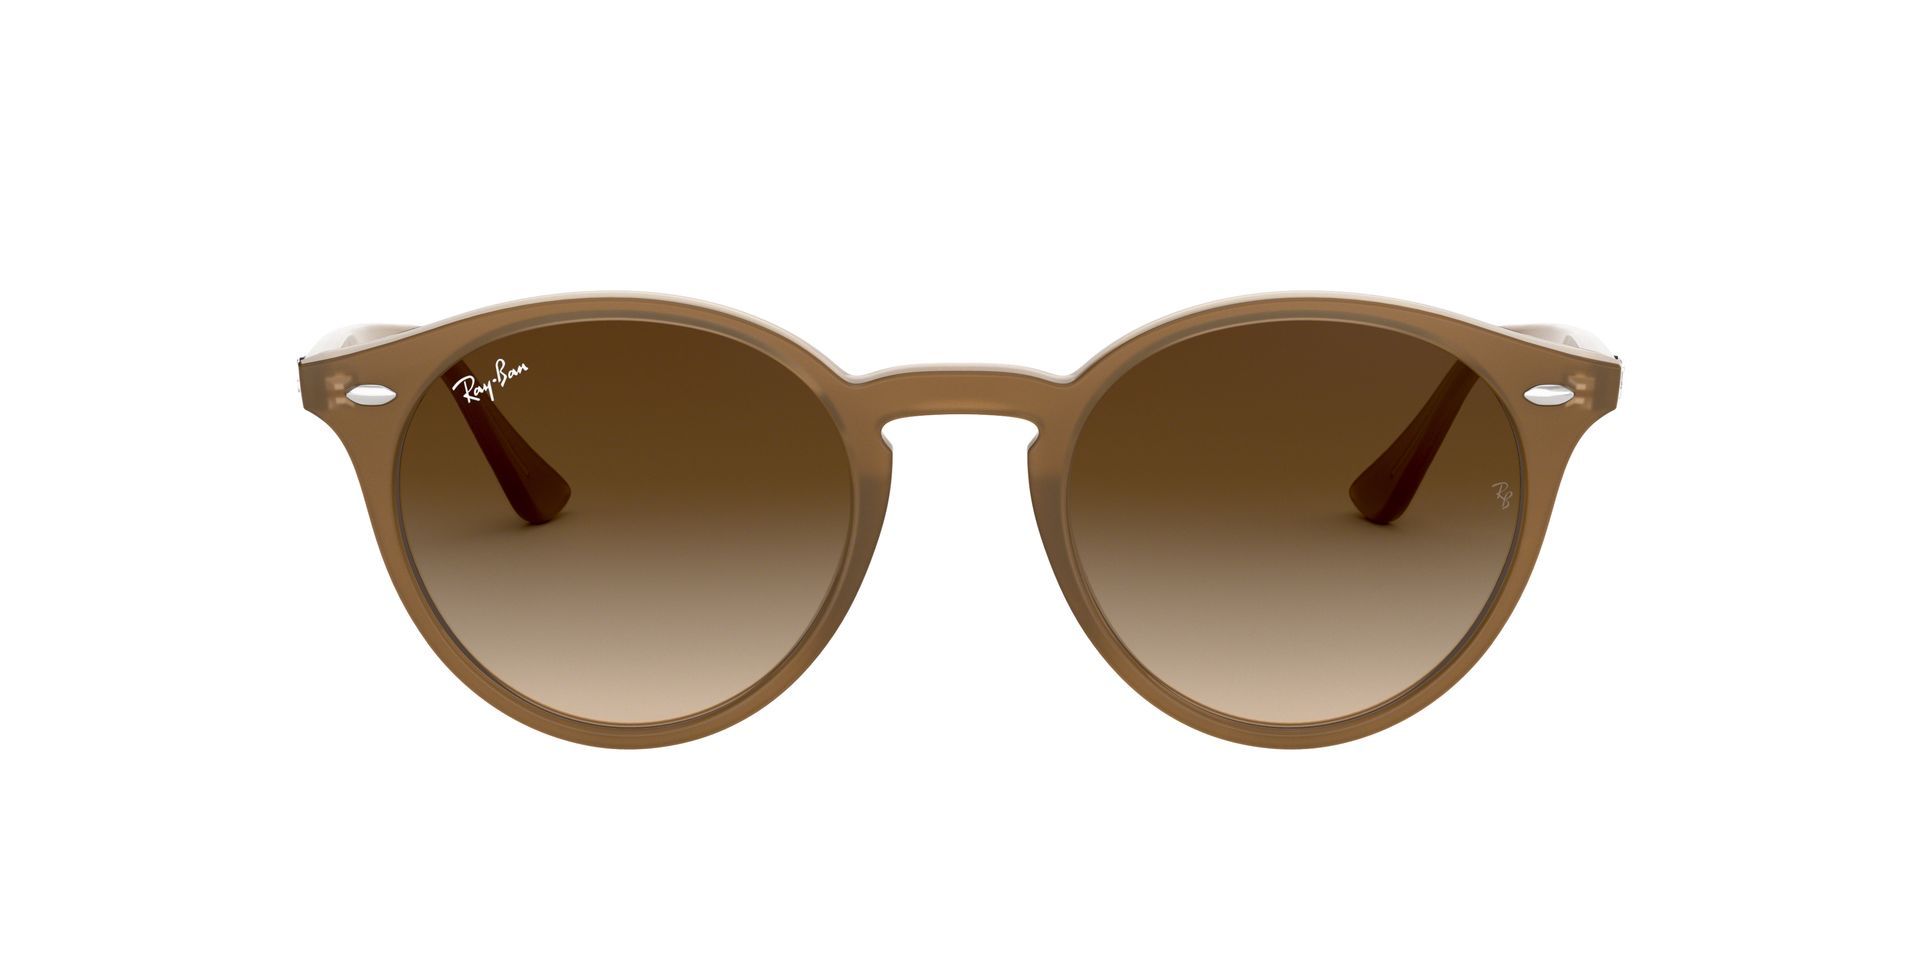 Ray-Ban Sunglasses Men Turtle Dove Brown Gradient| London Stansted Airport